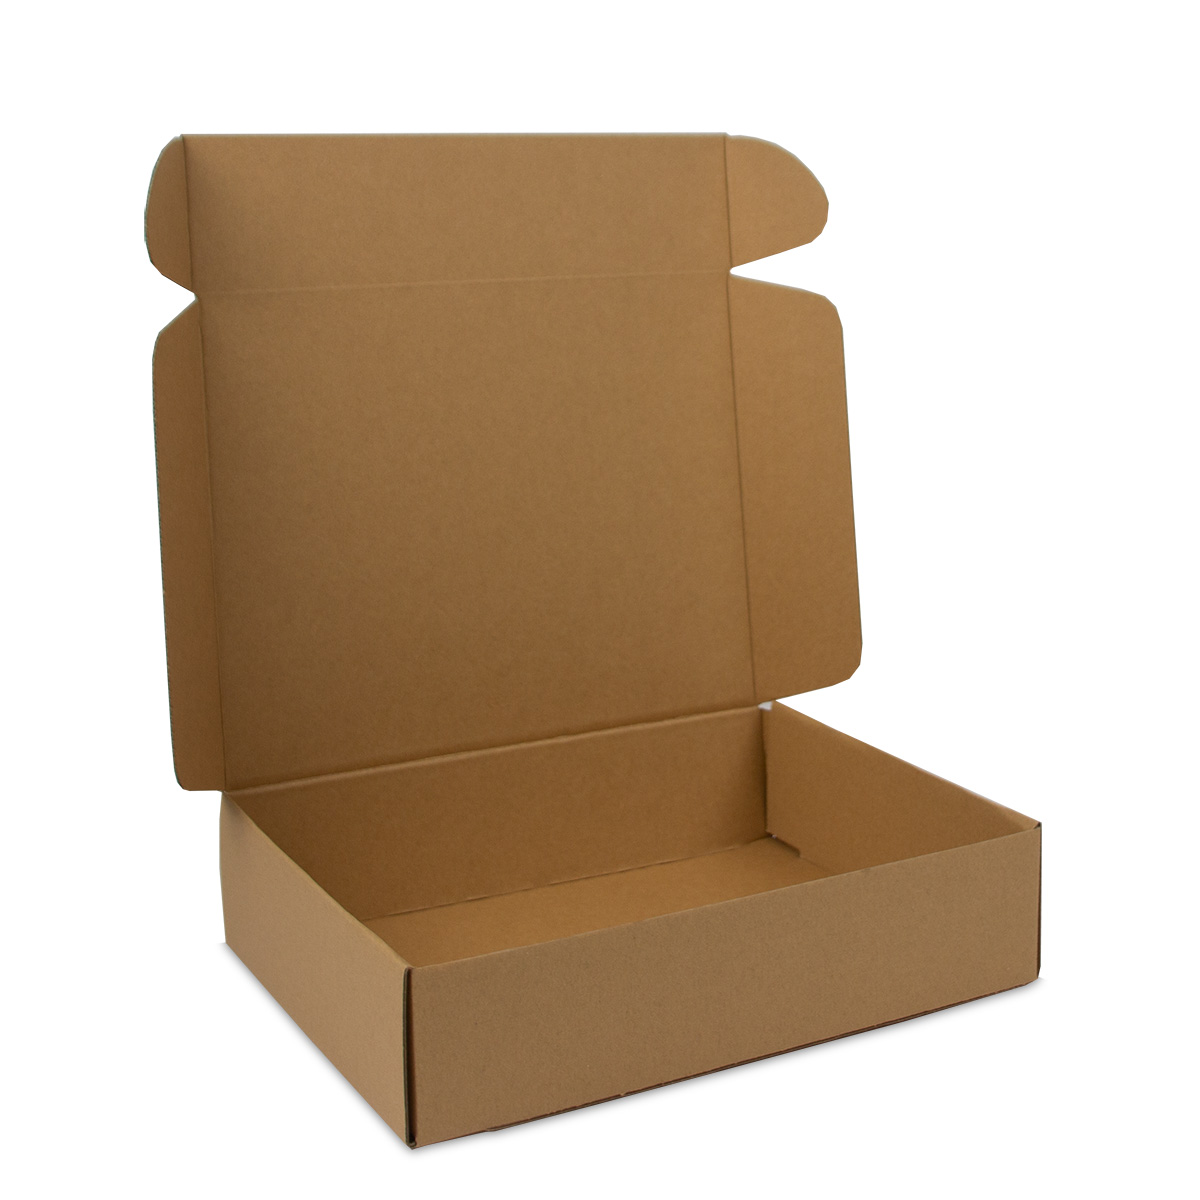 Food boxes/Meal boxes